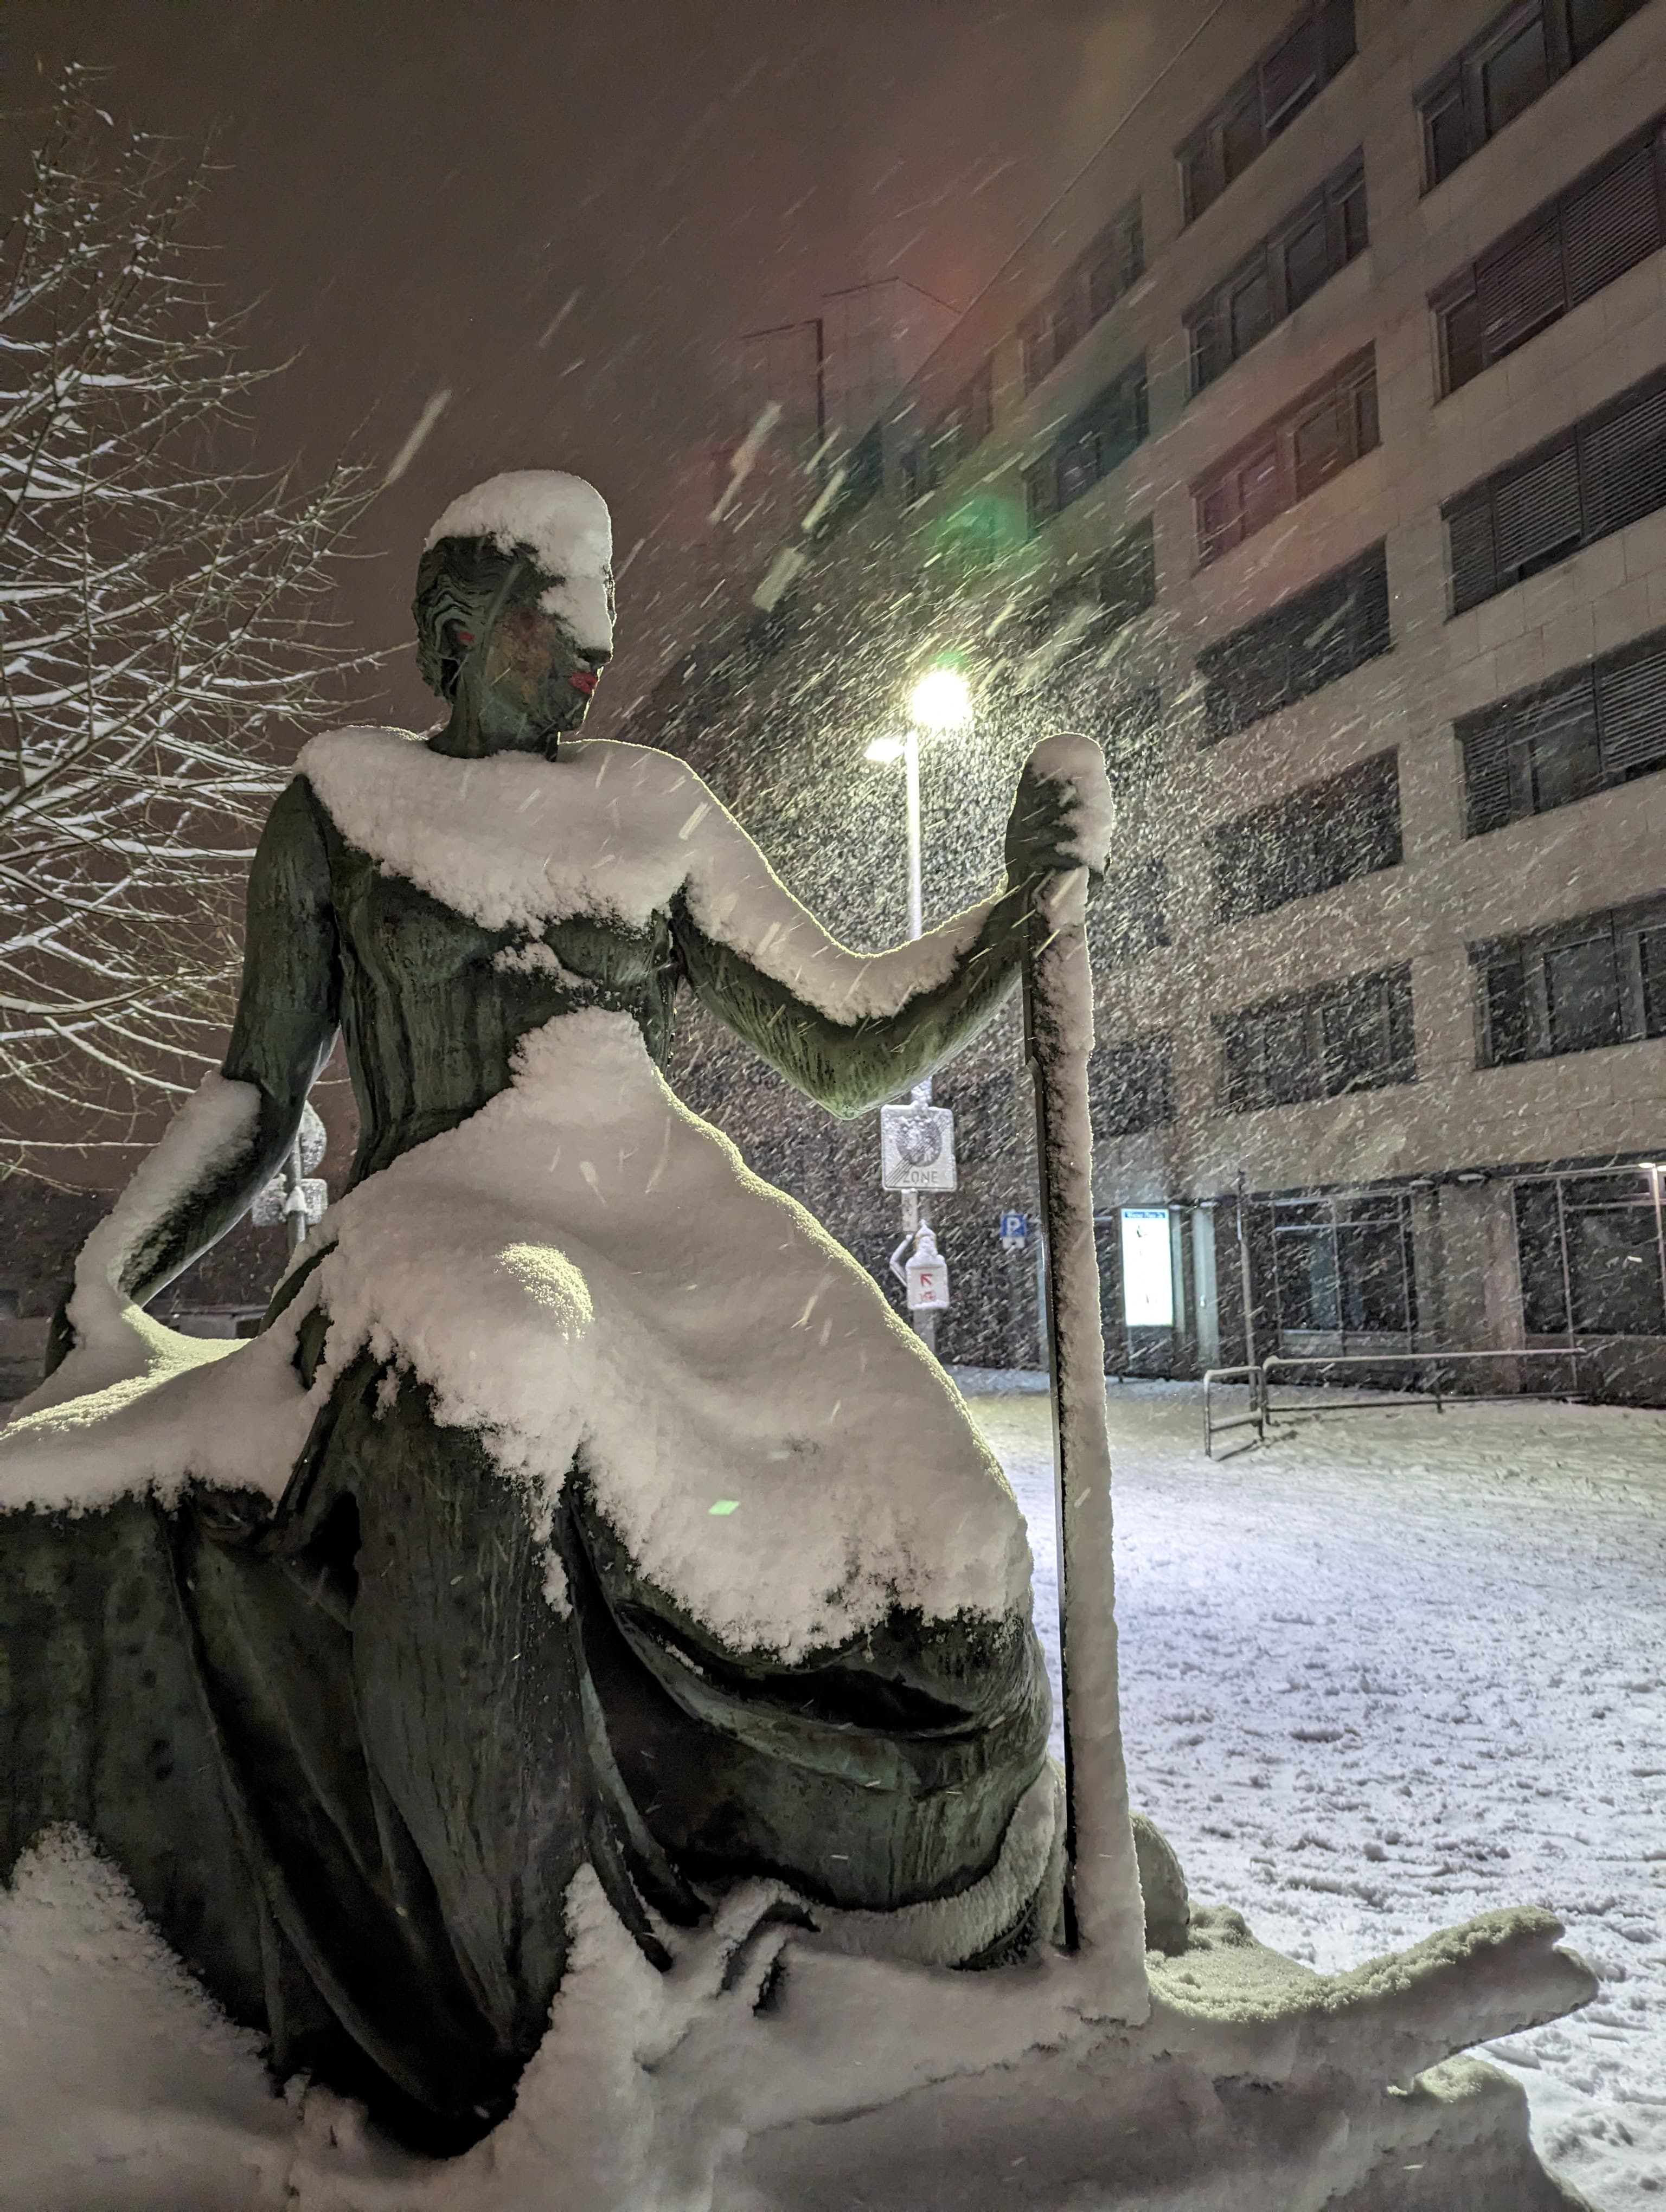 A statue of a women, partially covered in snow, lit from behind by a street lantern under heavy snowfall.